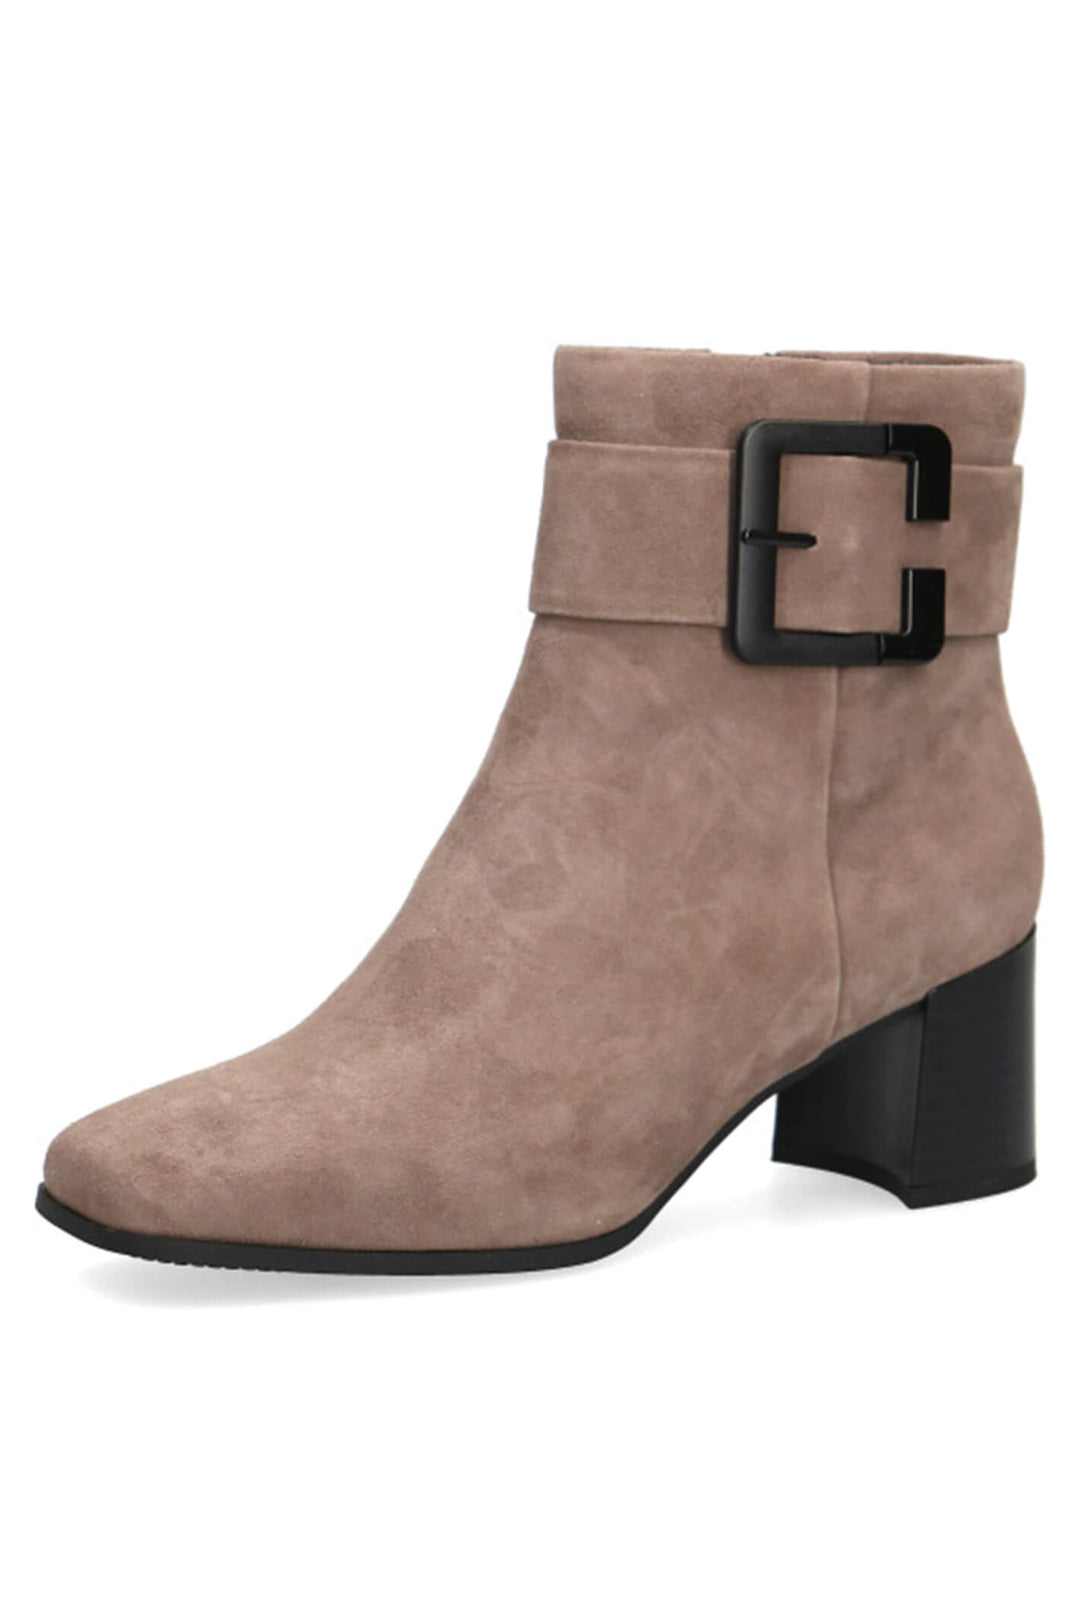 Caprice 25303-29 225 Stone Suede Leather Boots - Experience Boutique